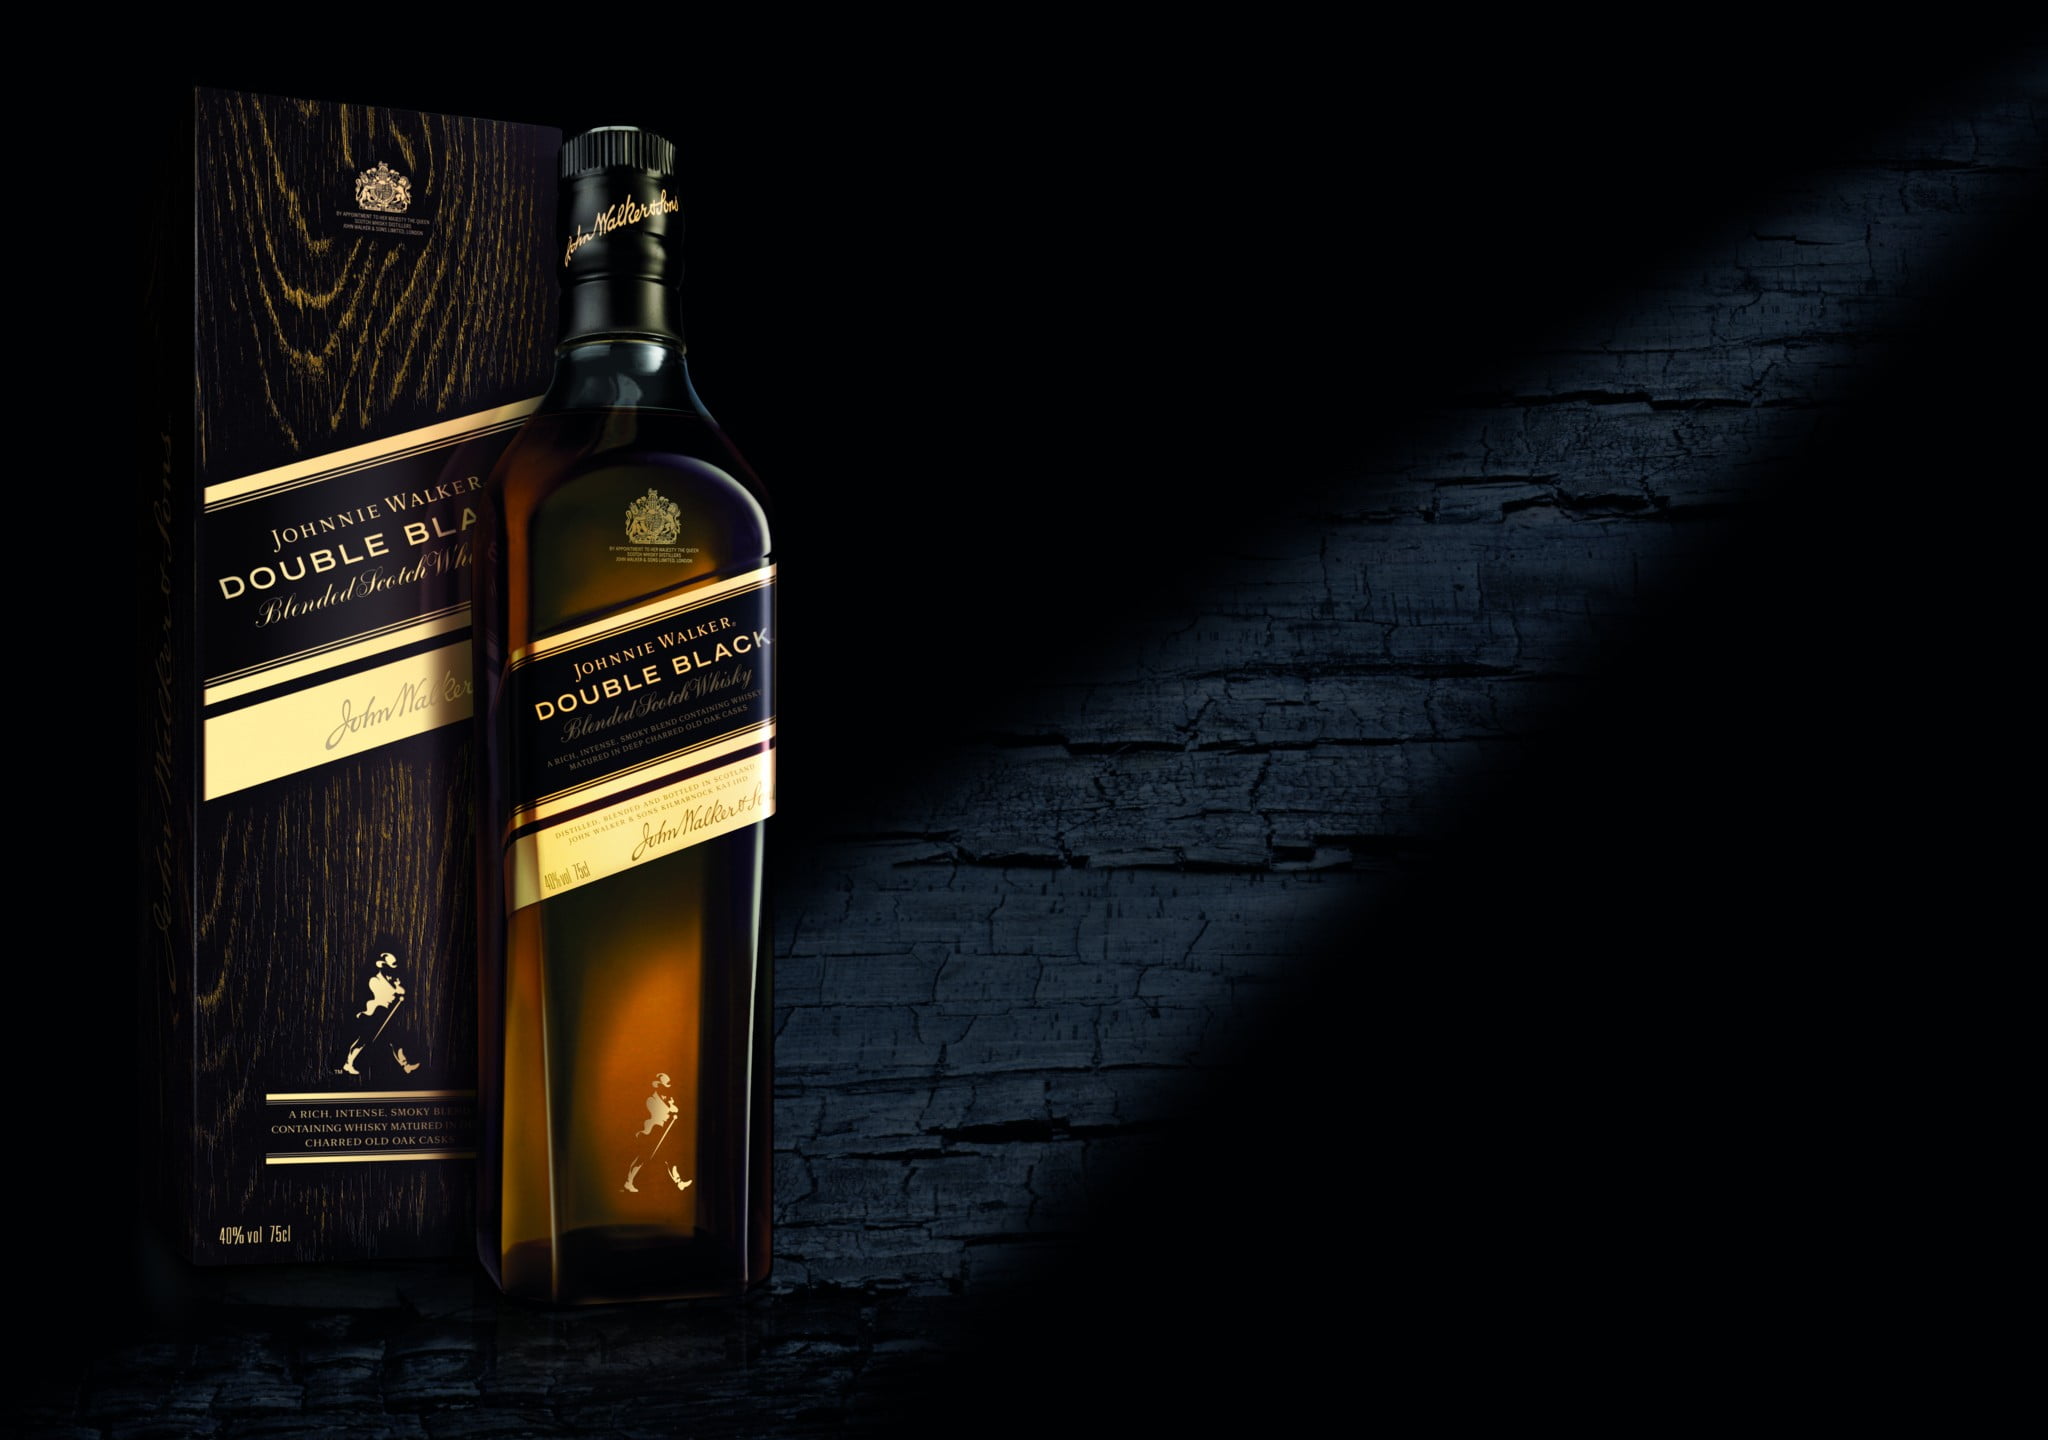 Double Black bottle with box, bottles, alcohol, whisky, Johnnie Walker